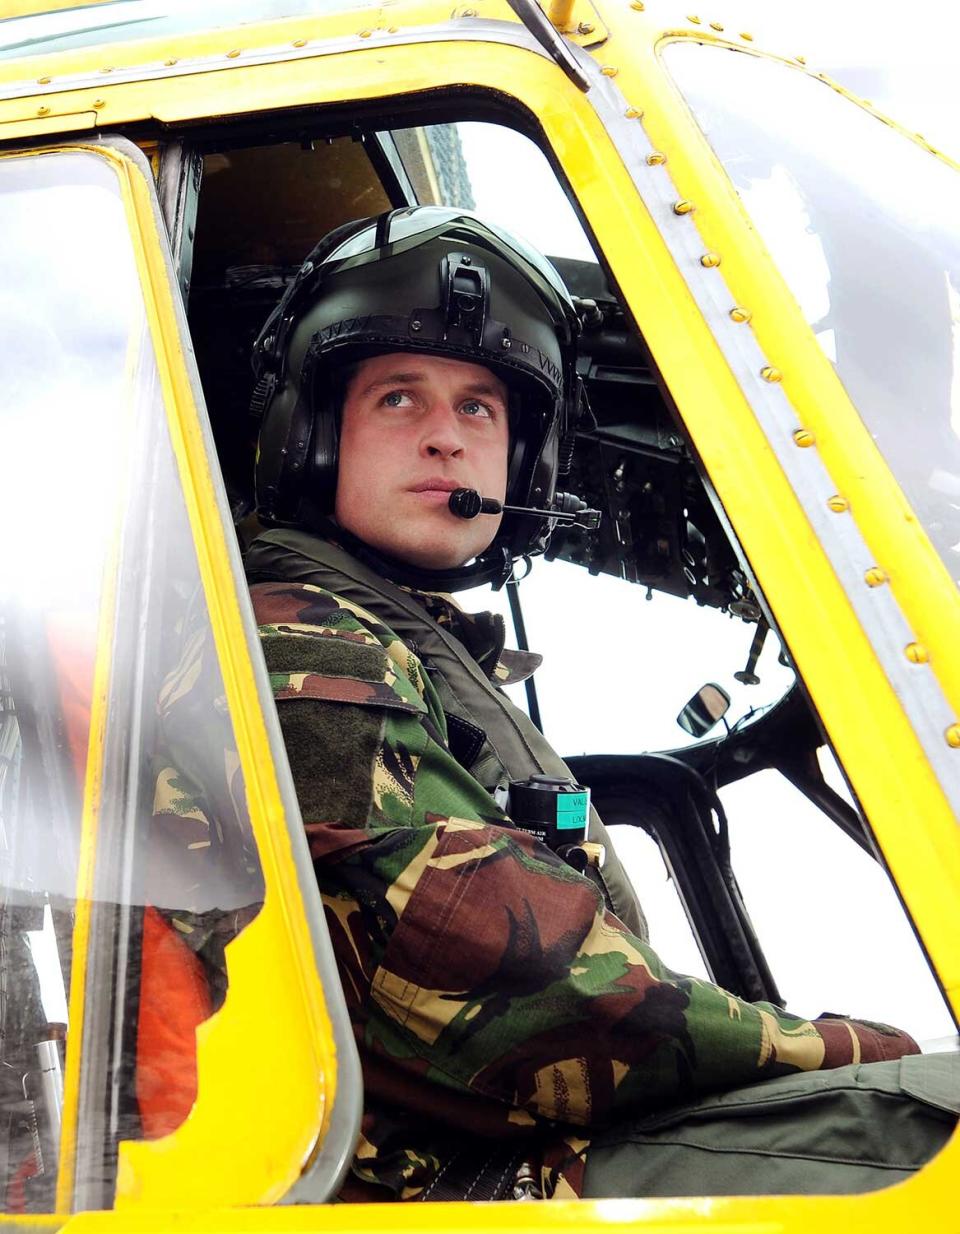 In a file picture taken on March 31, 2011 Britain's Prince William is pictured at the controls of a Sea King helicopter during a training exercise at Holyhead Mountain, having flown from RAF Valley in Anglesey, north Wales. Britain's Prince William will be deployed to the Falkland Islands early 2012 on a six-week tour of duty as a search and rescue helicopter pilot, the Royal Air Force said on November 10, 2011.